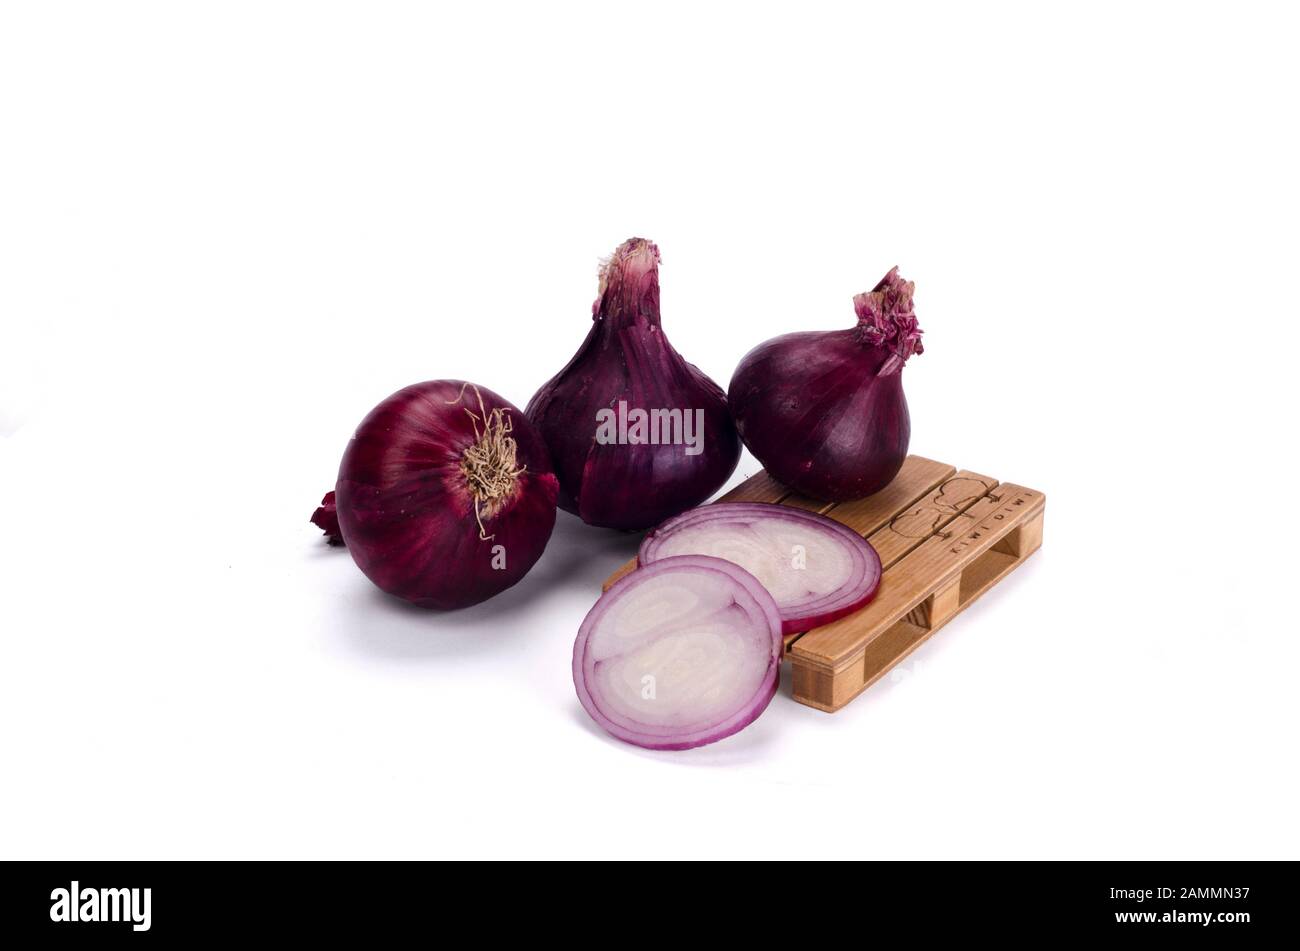 Red onion photo on a white background Stock Photo